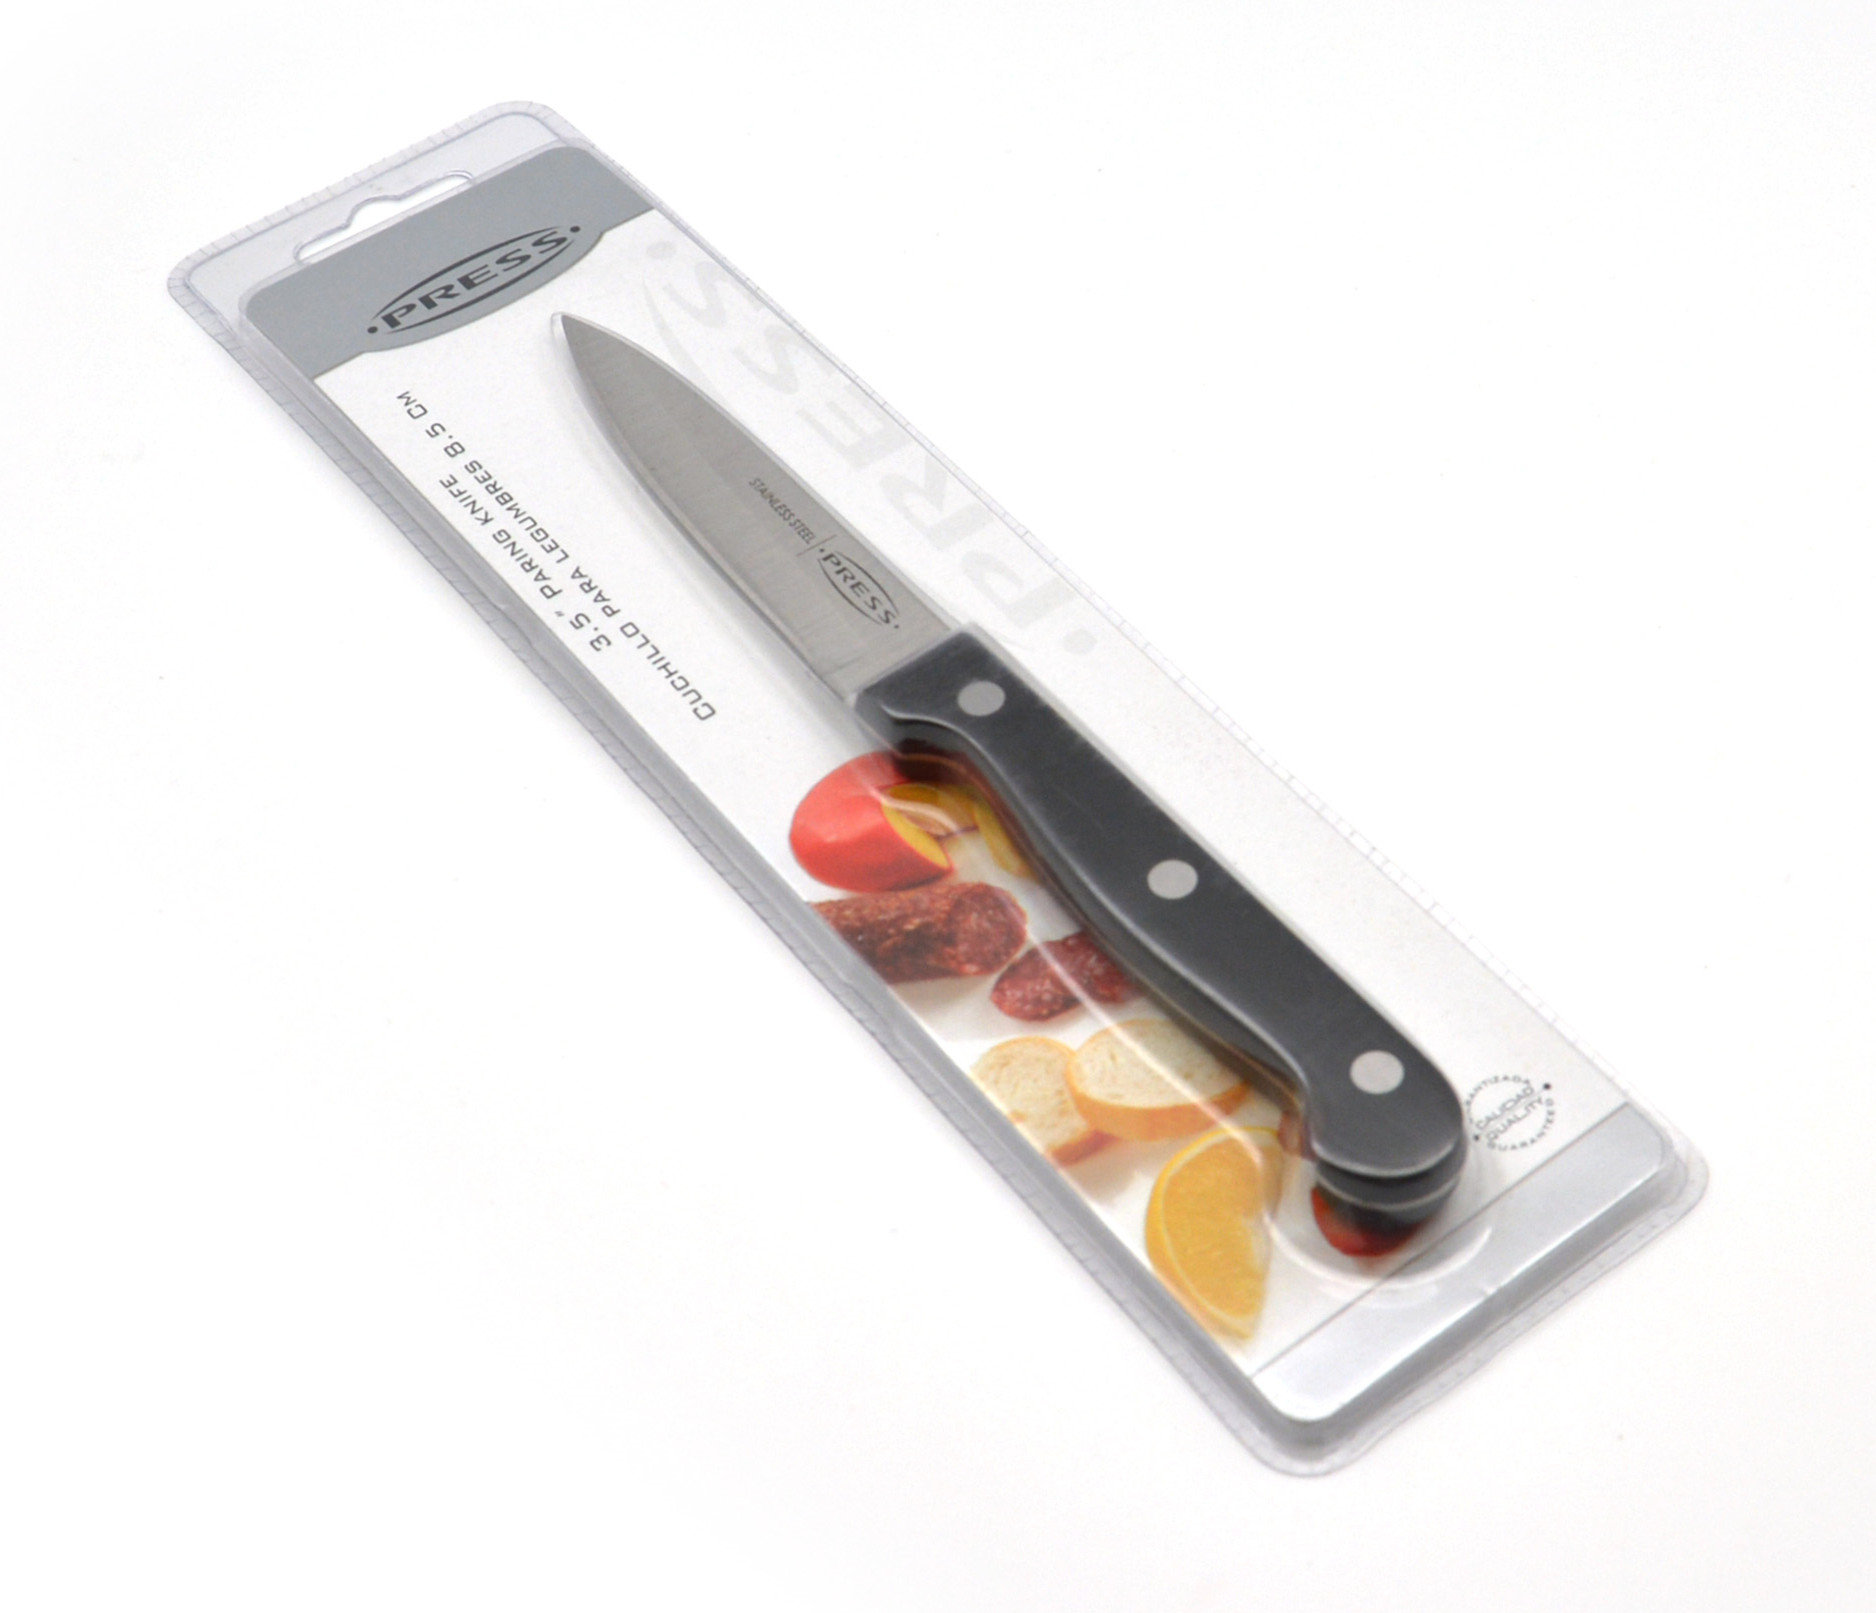 OXO Good Grips 3.5 Paring Knife & Reviews